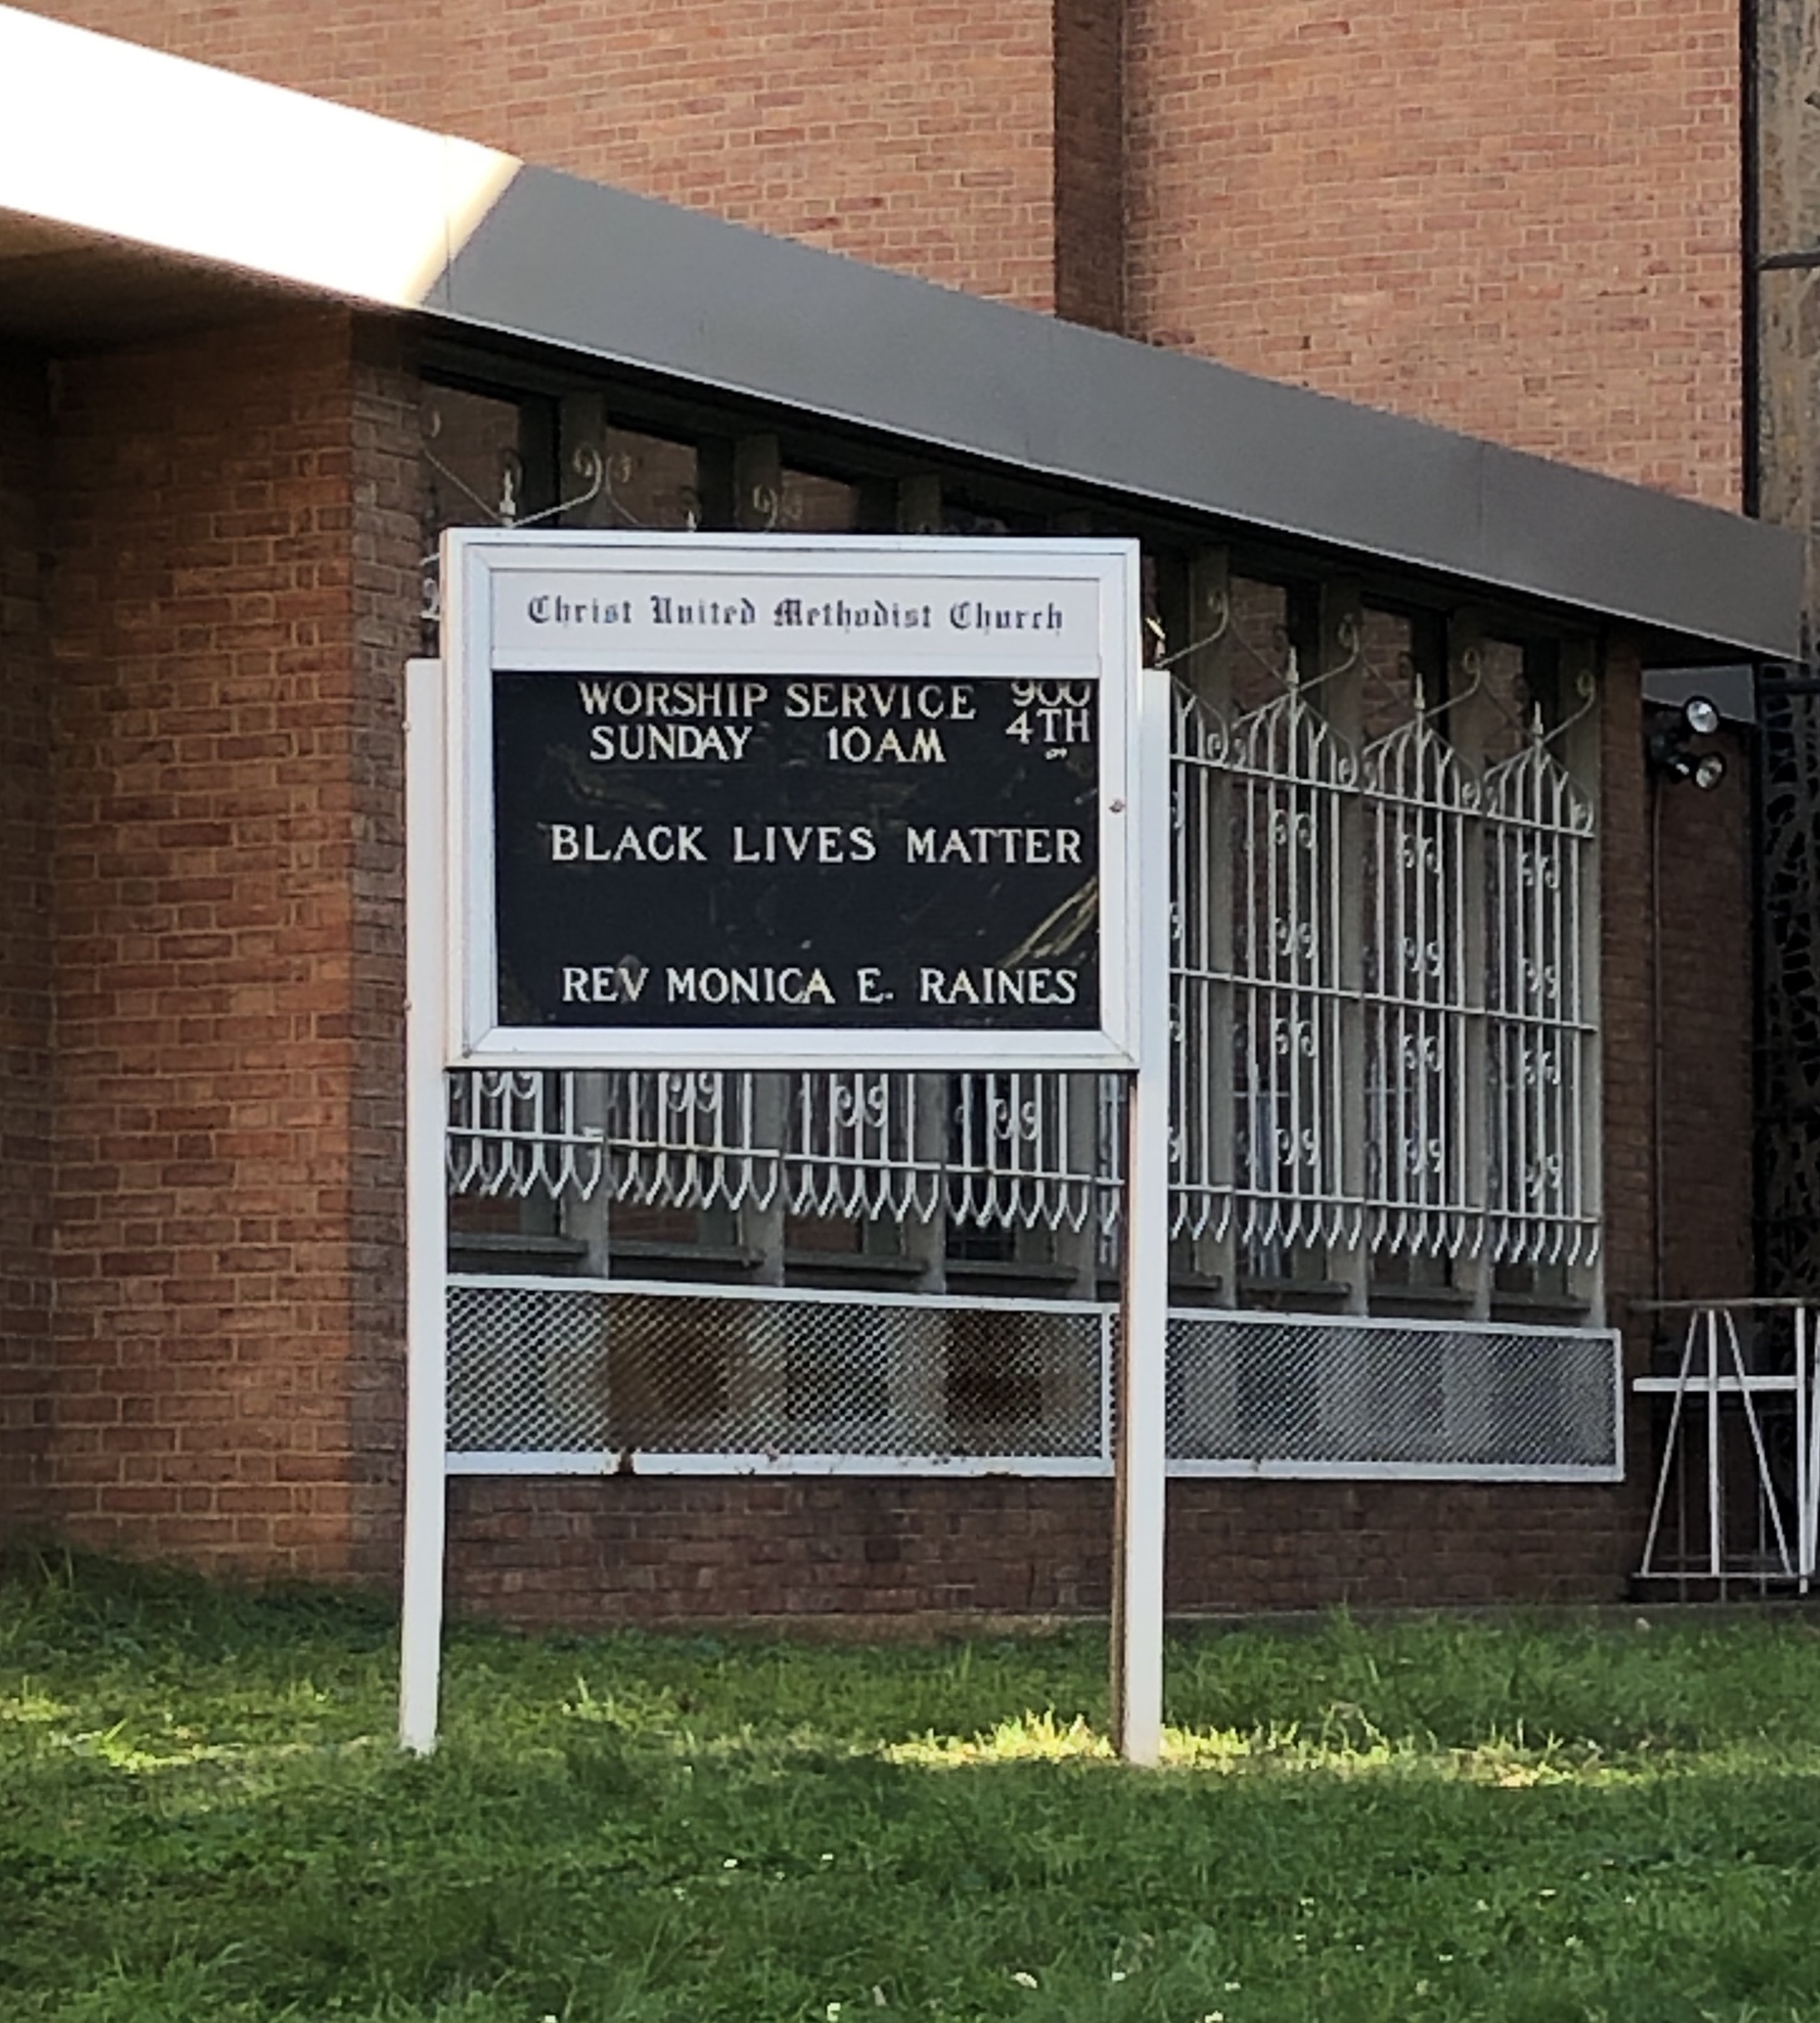 Photograph of an outdoor church letterboard sign that reads “Worship service Sunday ten A.M.,” and “Black Lives Matter.”